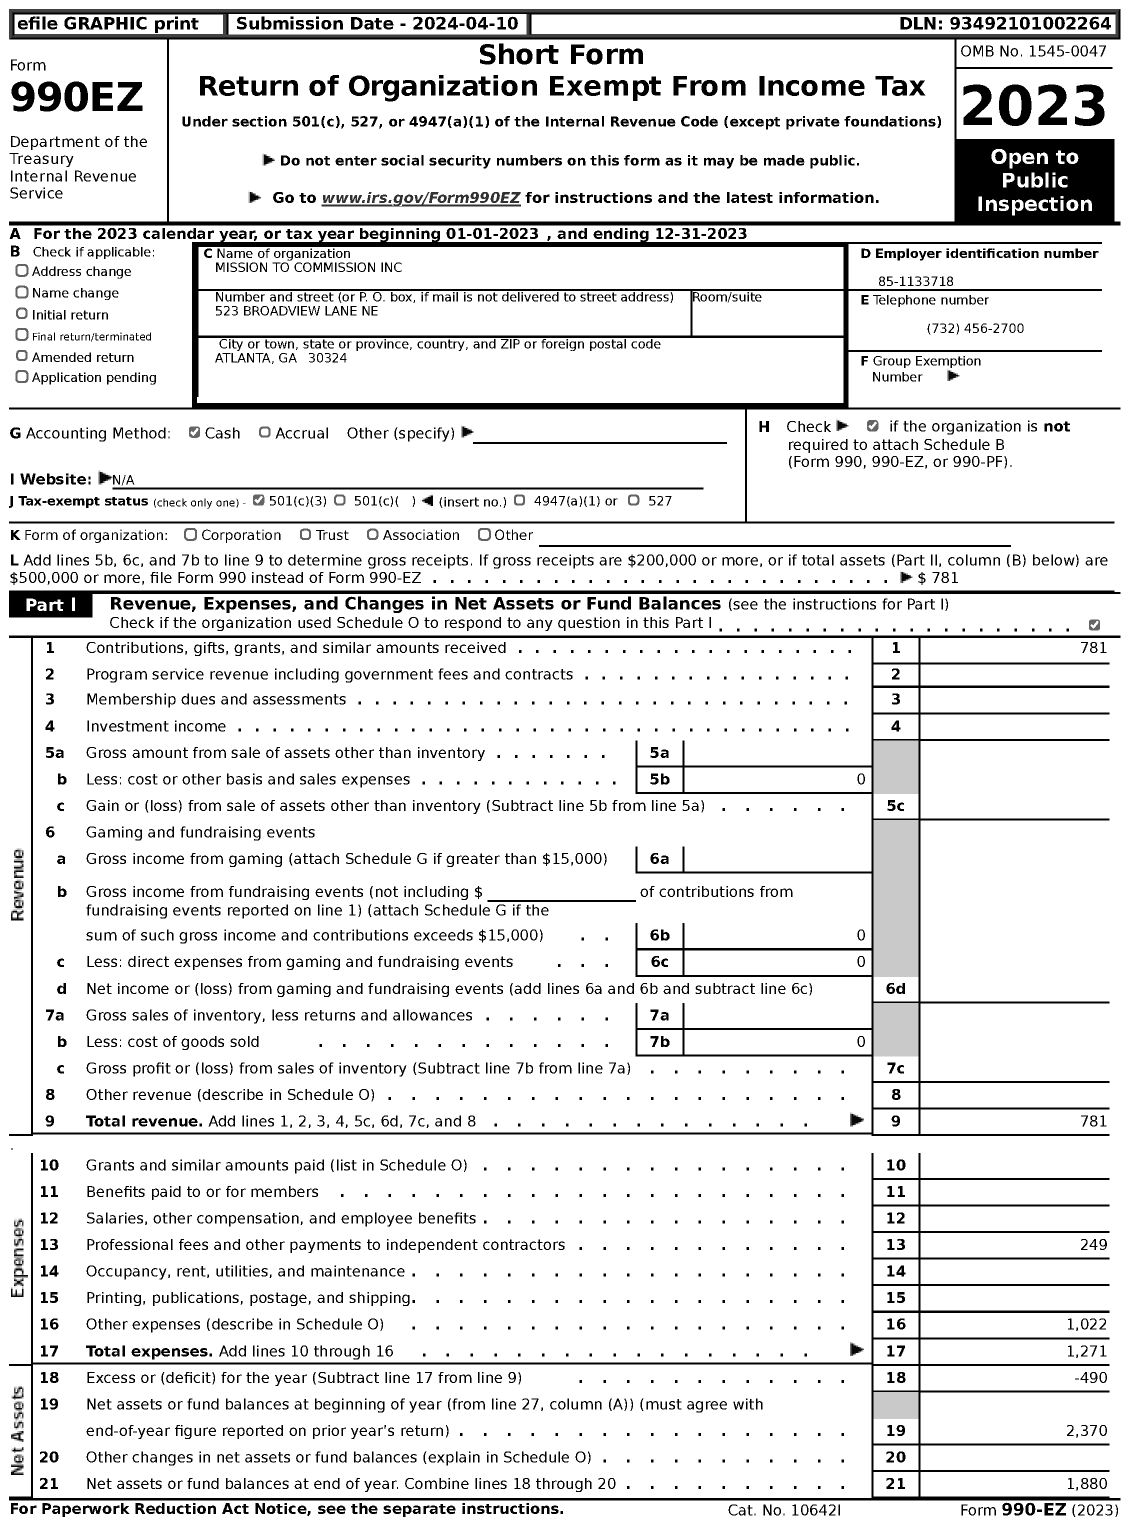 Image of first page of 2023 Form 990EZ for Mission to Commission Inc. (MTC)